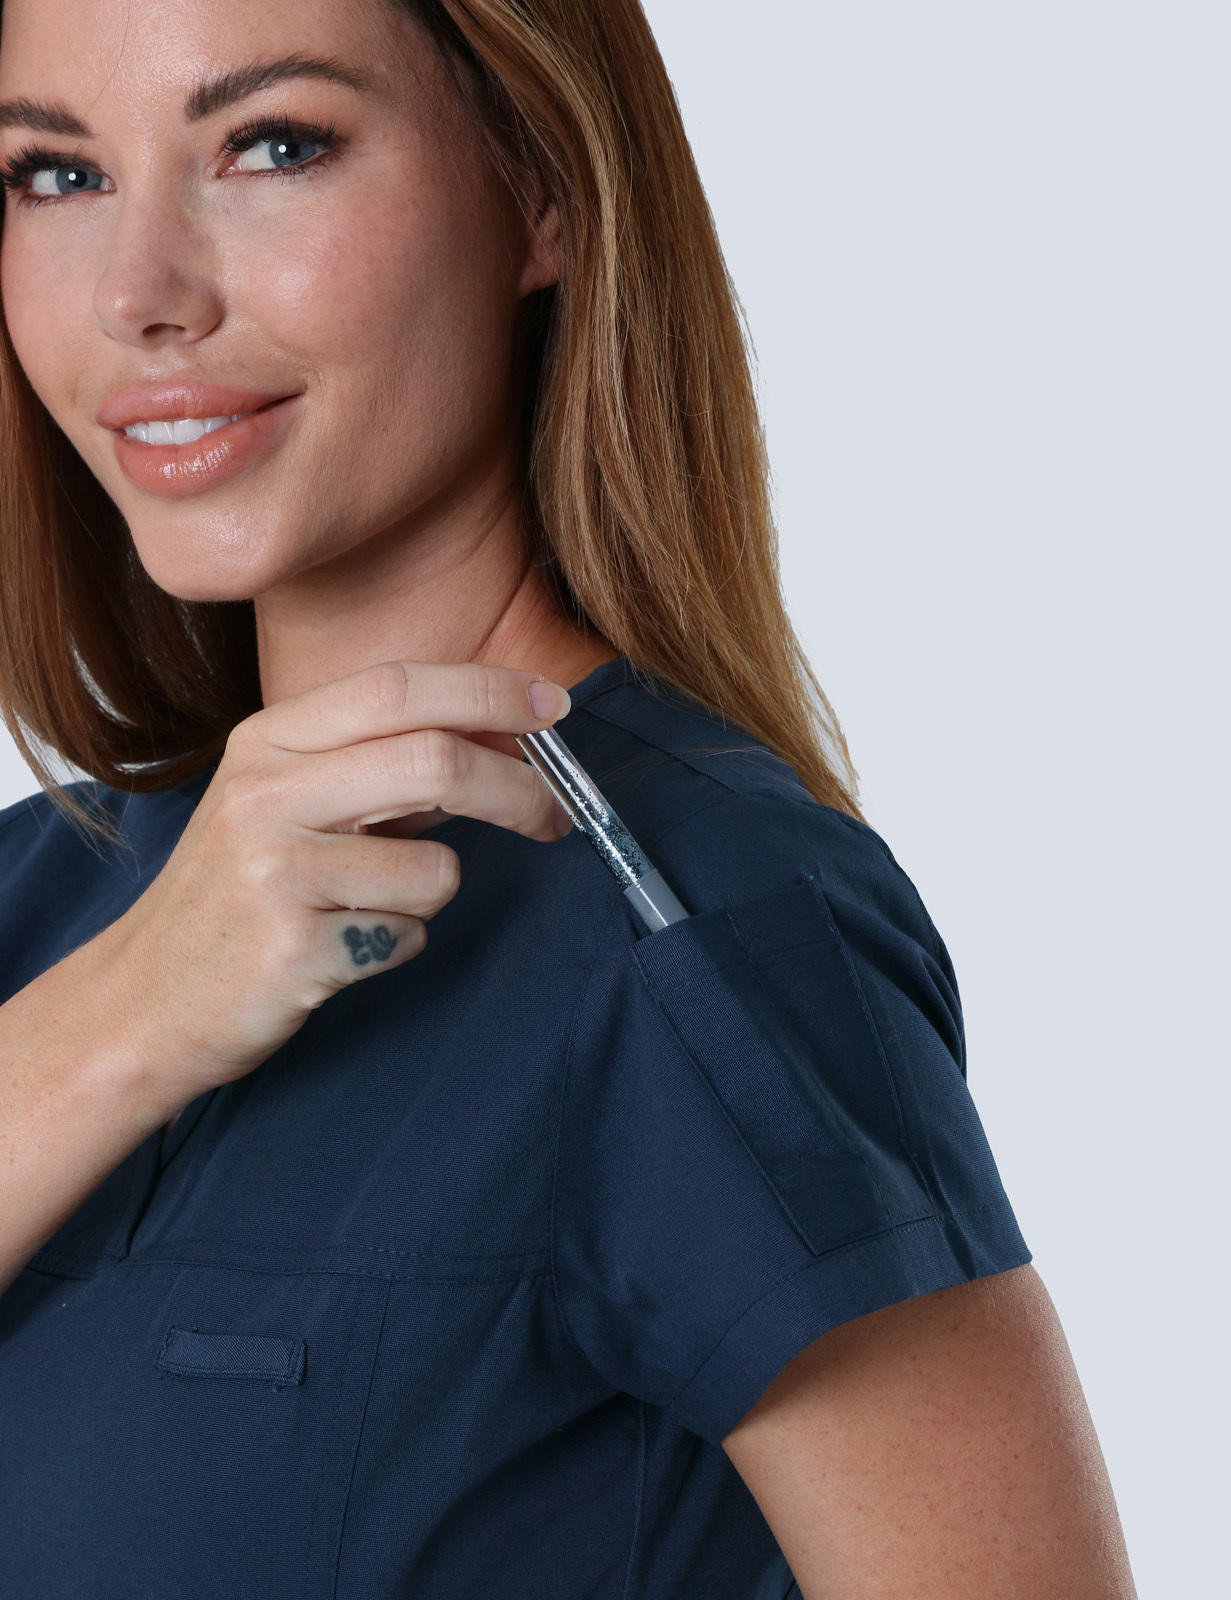 Caloundra Hospital - Registered Nurse (Women's Fit Solid Scrub Top and Cargo Pants in Navy incl Logos)